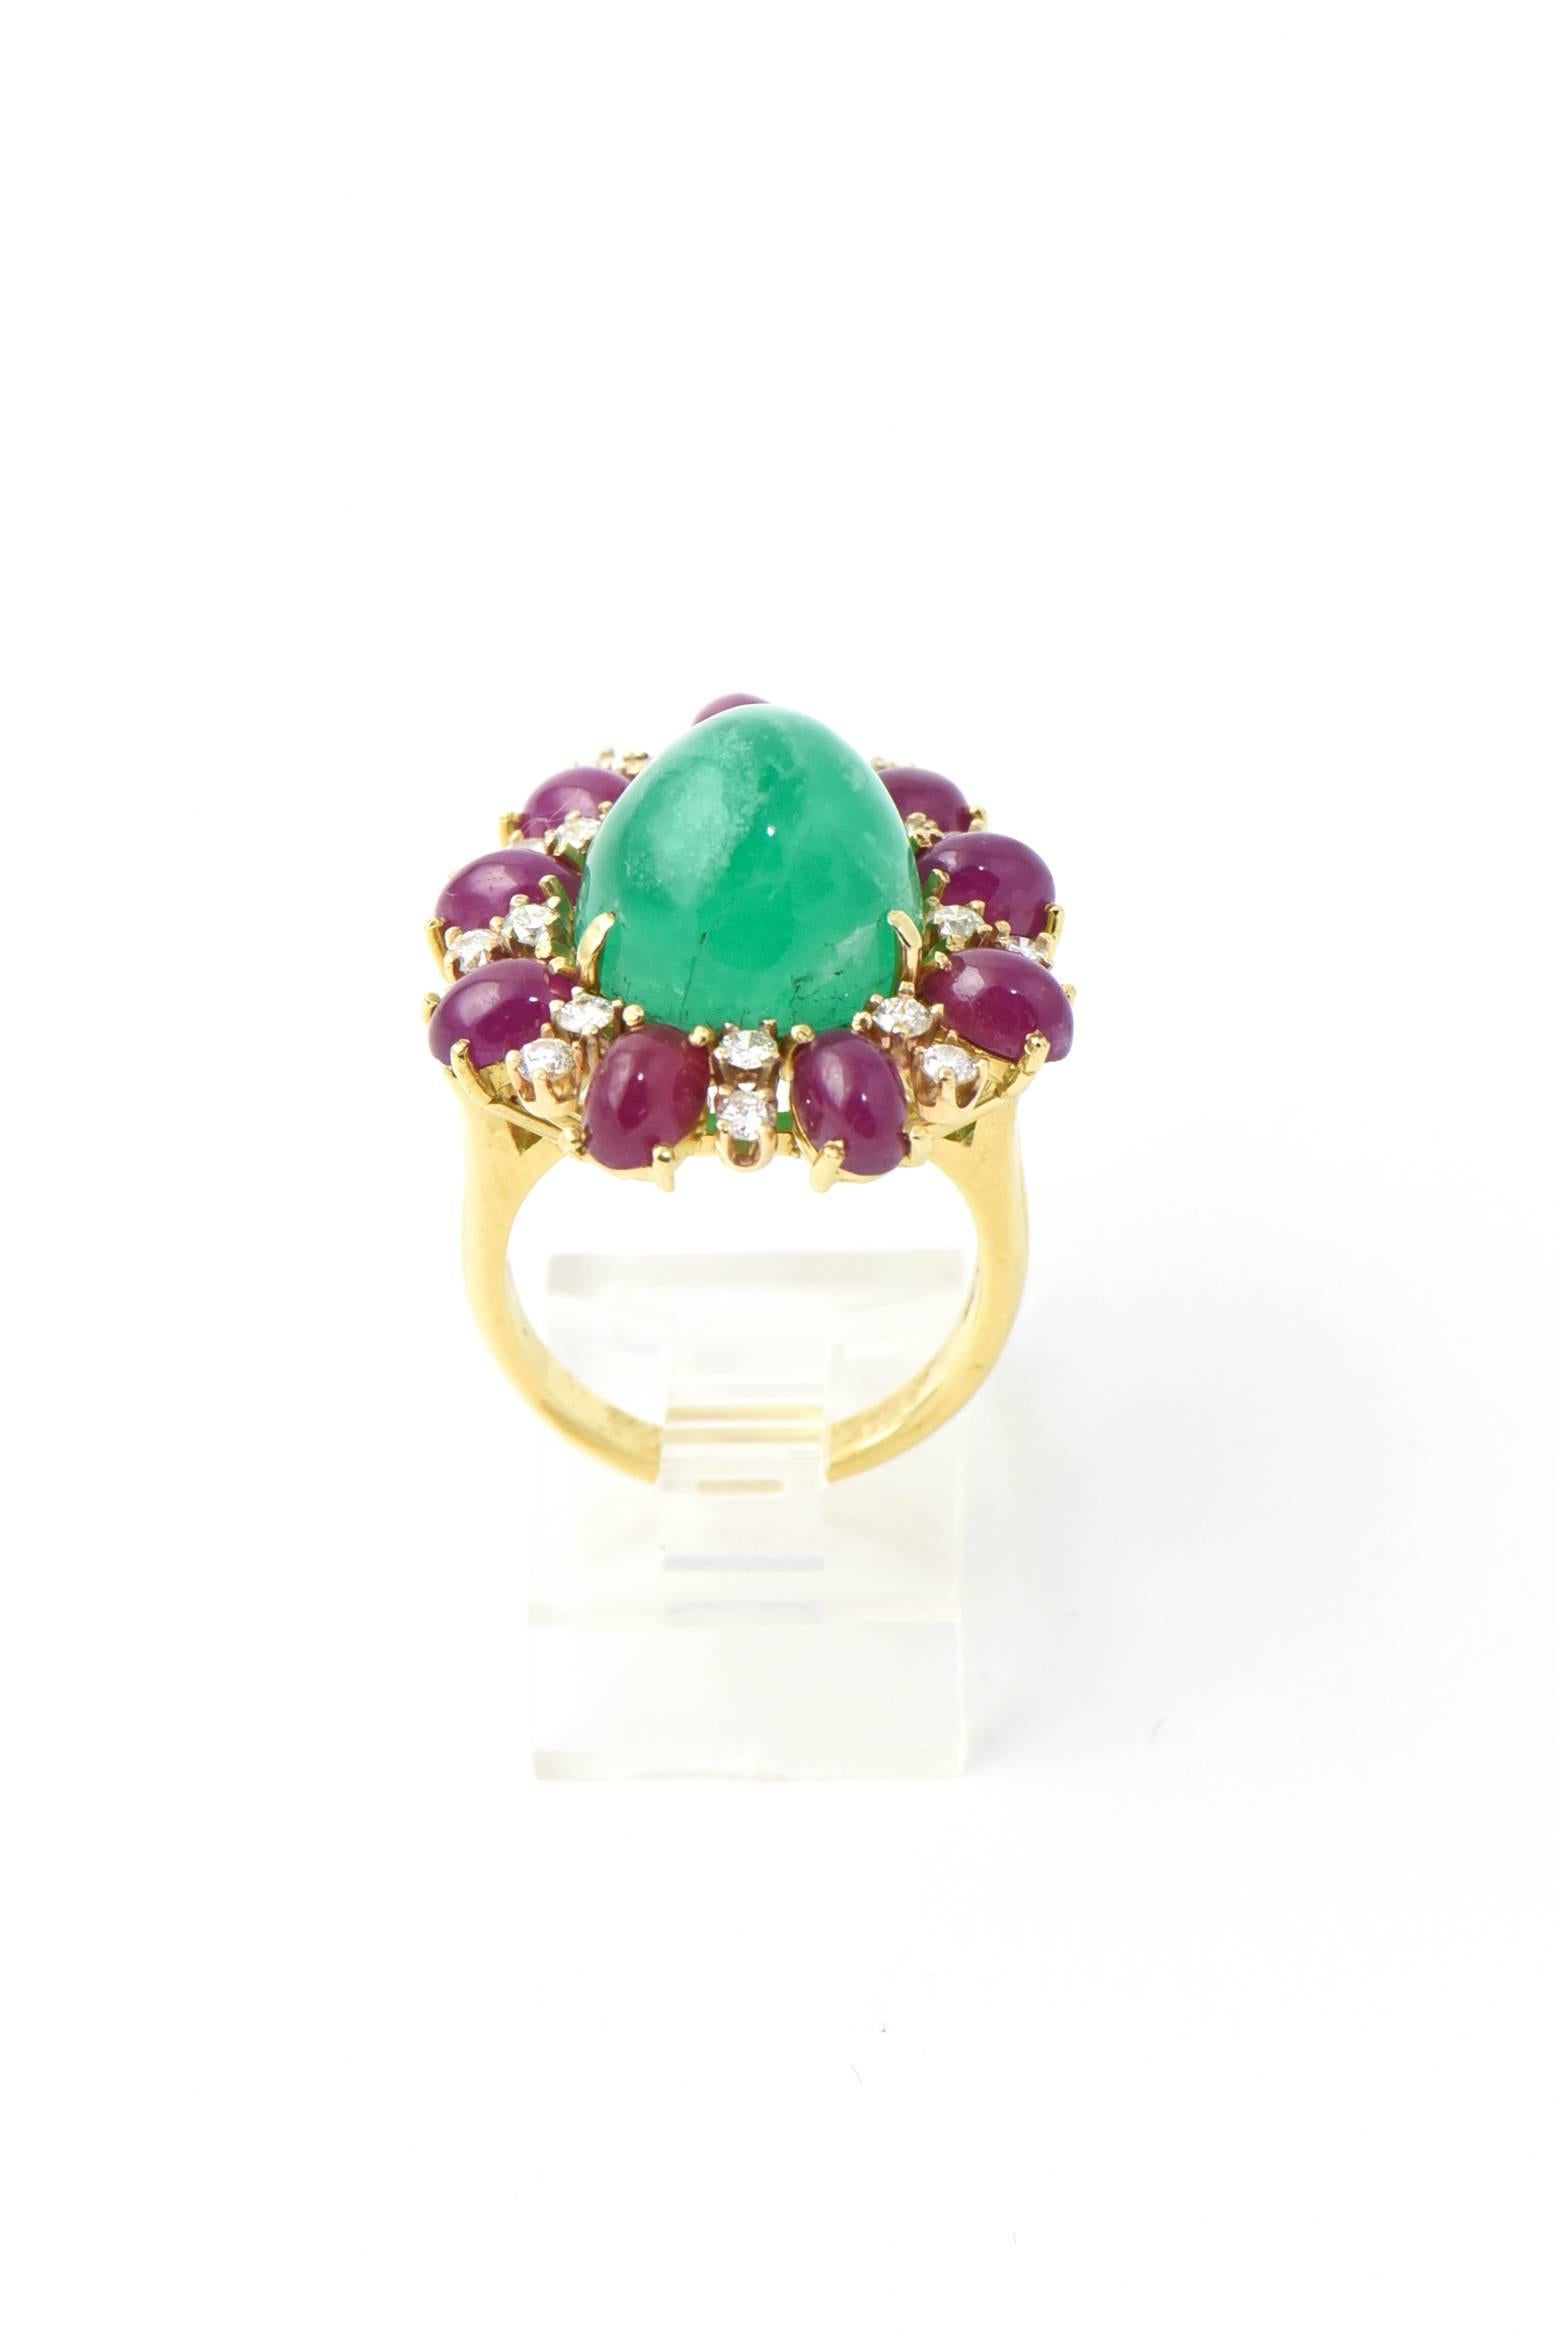 Emerald Ruby Diamond Gold Statement Ring In Excellent Condition For Sale In Miami Beach, FL